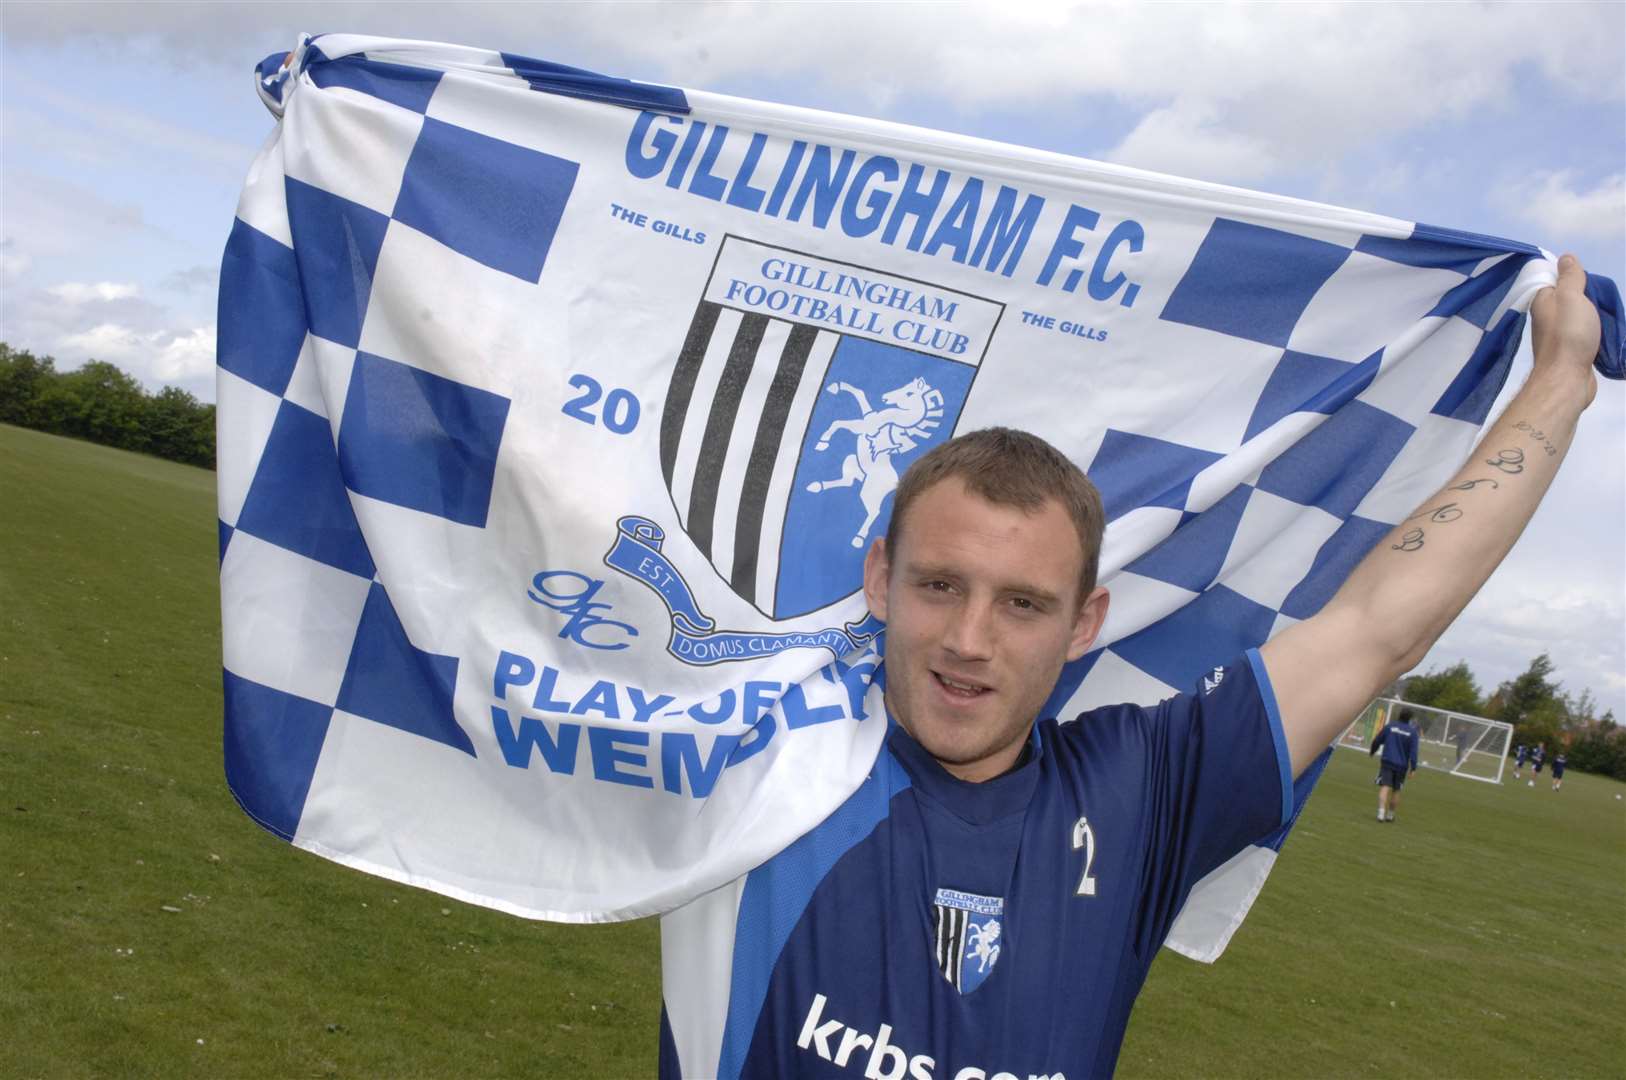 Barry Fuller is back with the Gills, almost a decade after leading them to Wembley as captain